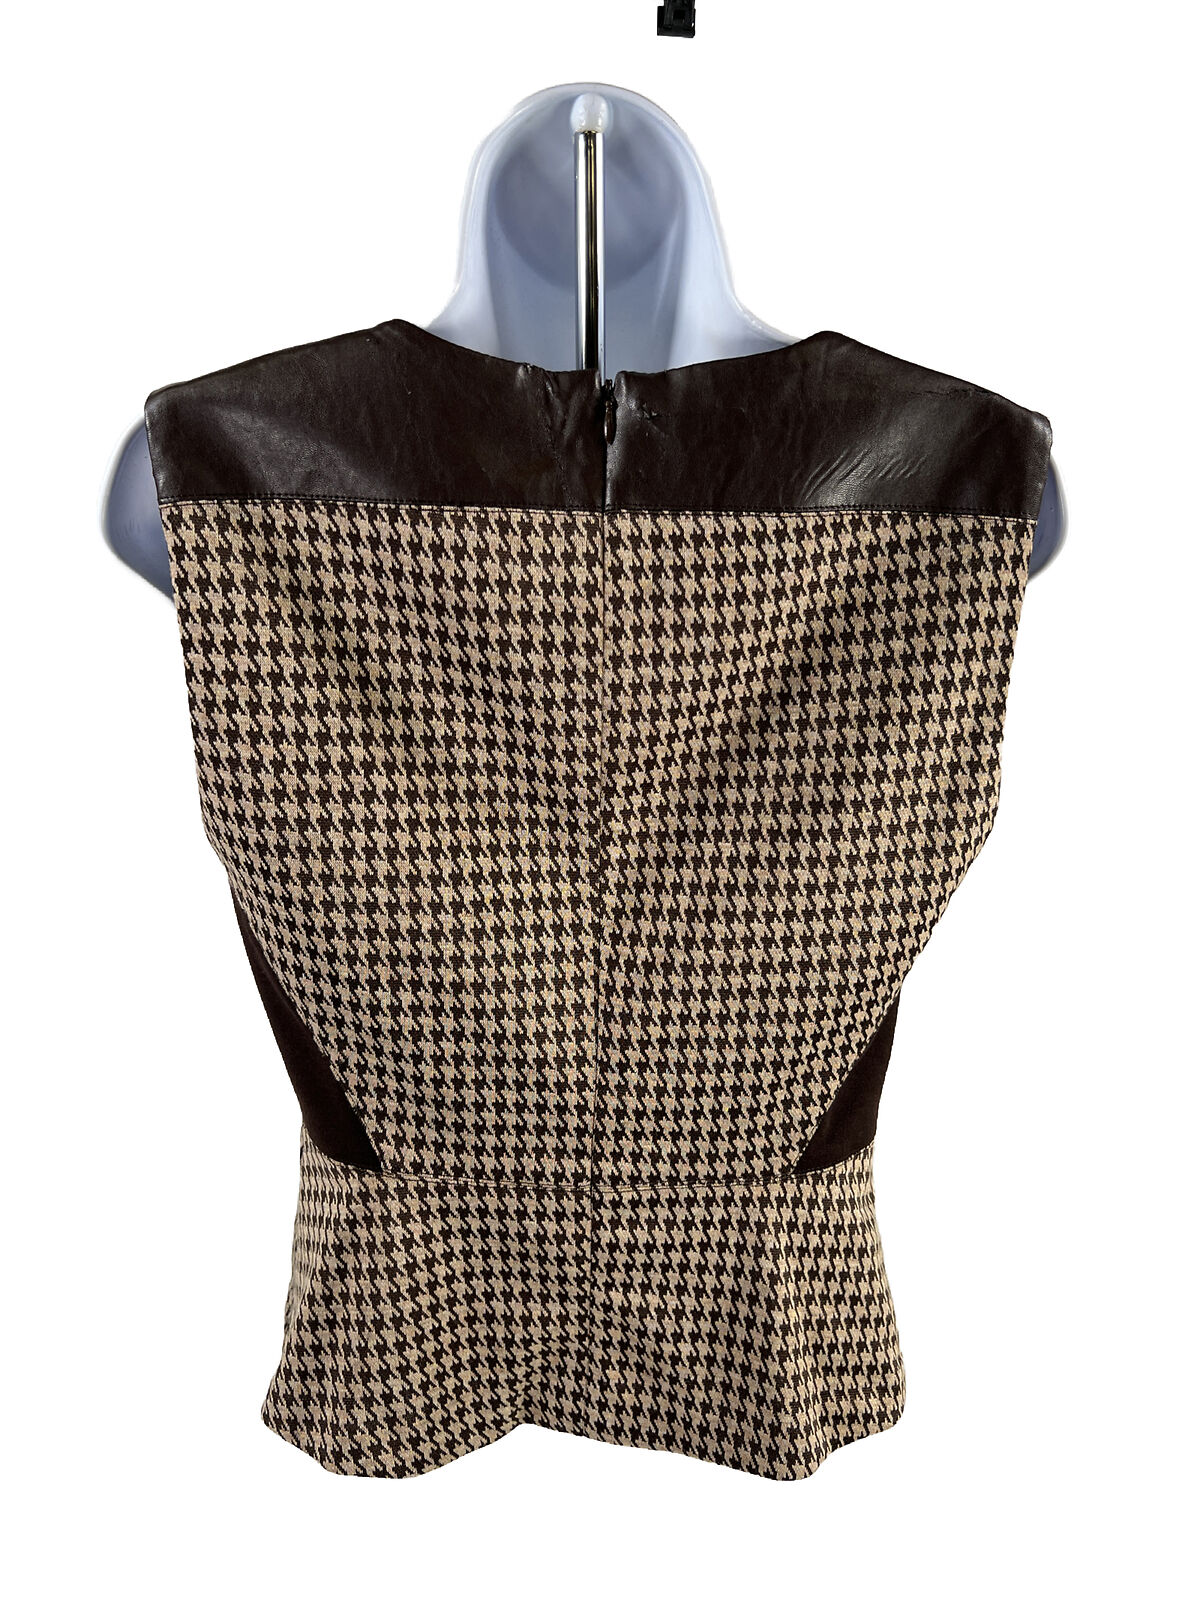 NEW Anne Klein Women's Brown Houndstooth Sleeveless Tank Top Blouse - 4